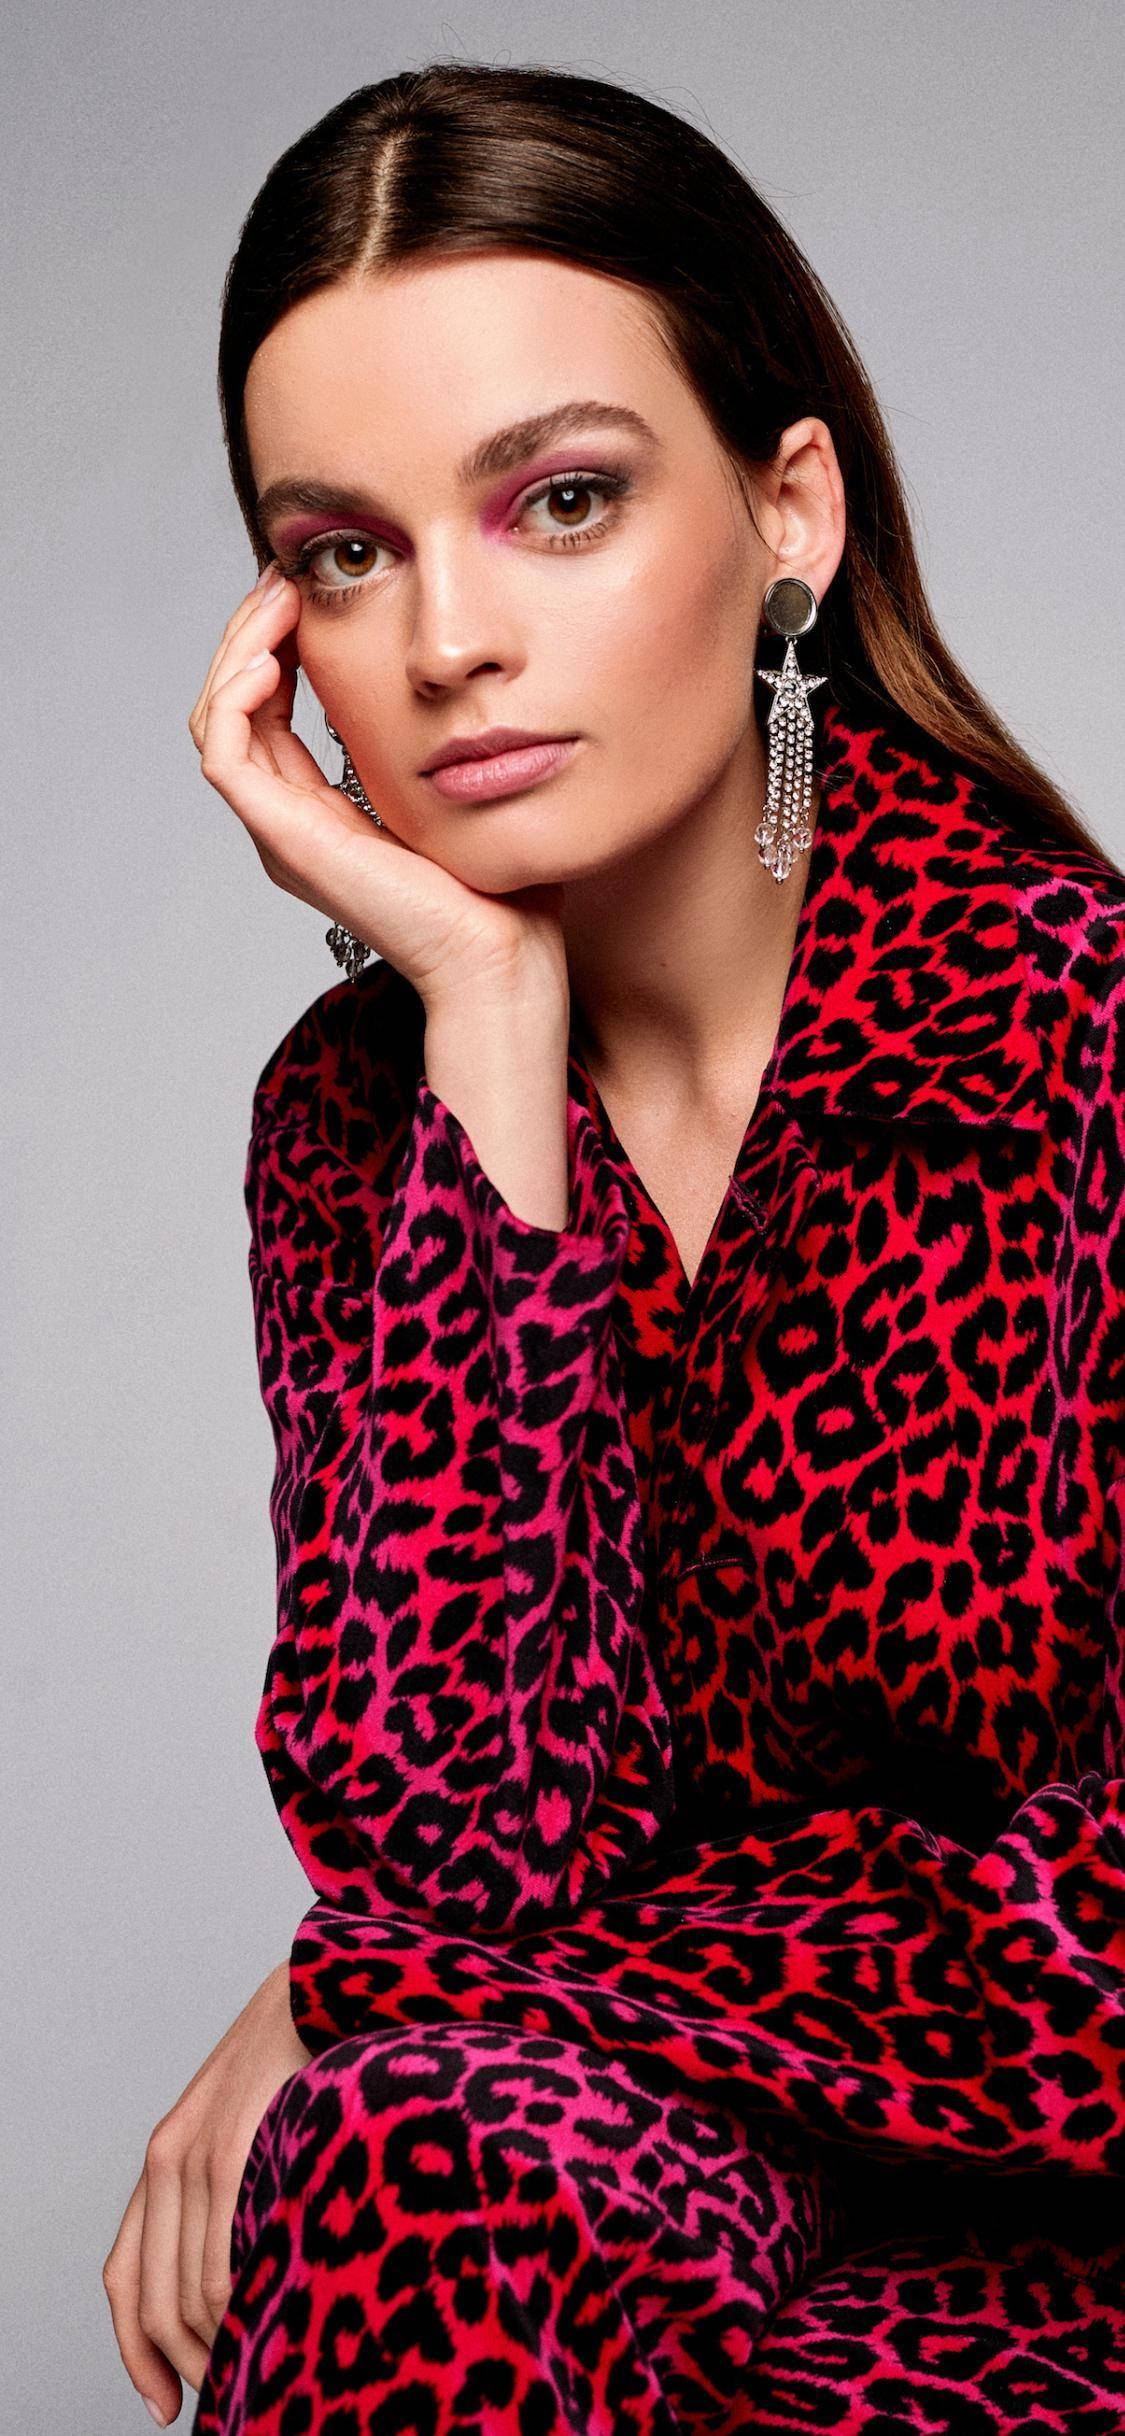 A Fashion Spread Featuring The Talented Emma Mackey Wearing A Loud Red Leopard Printed Suit